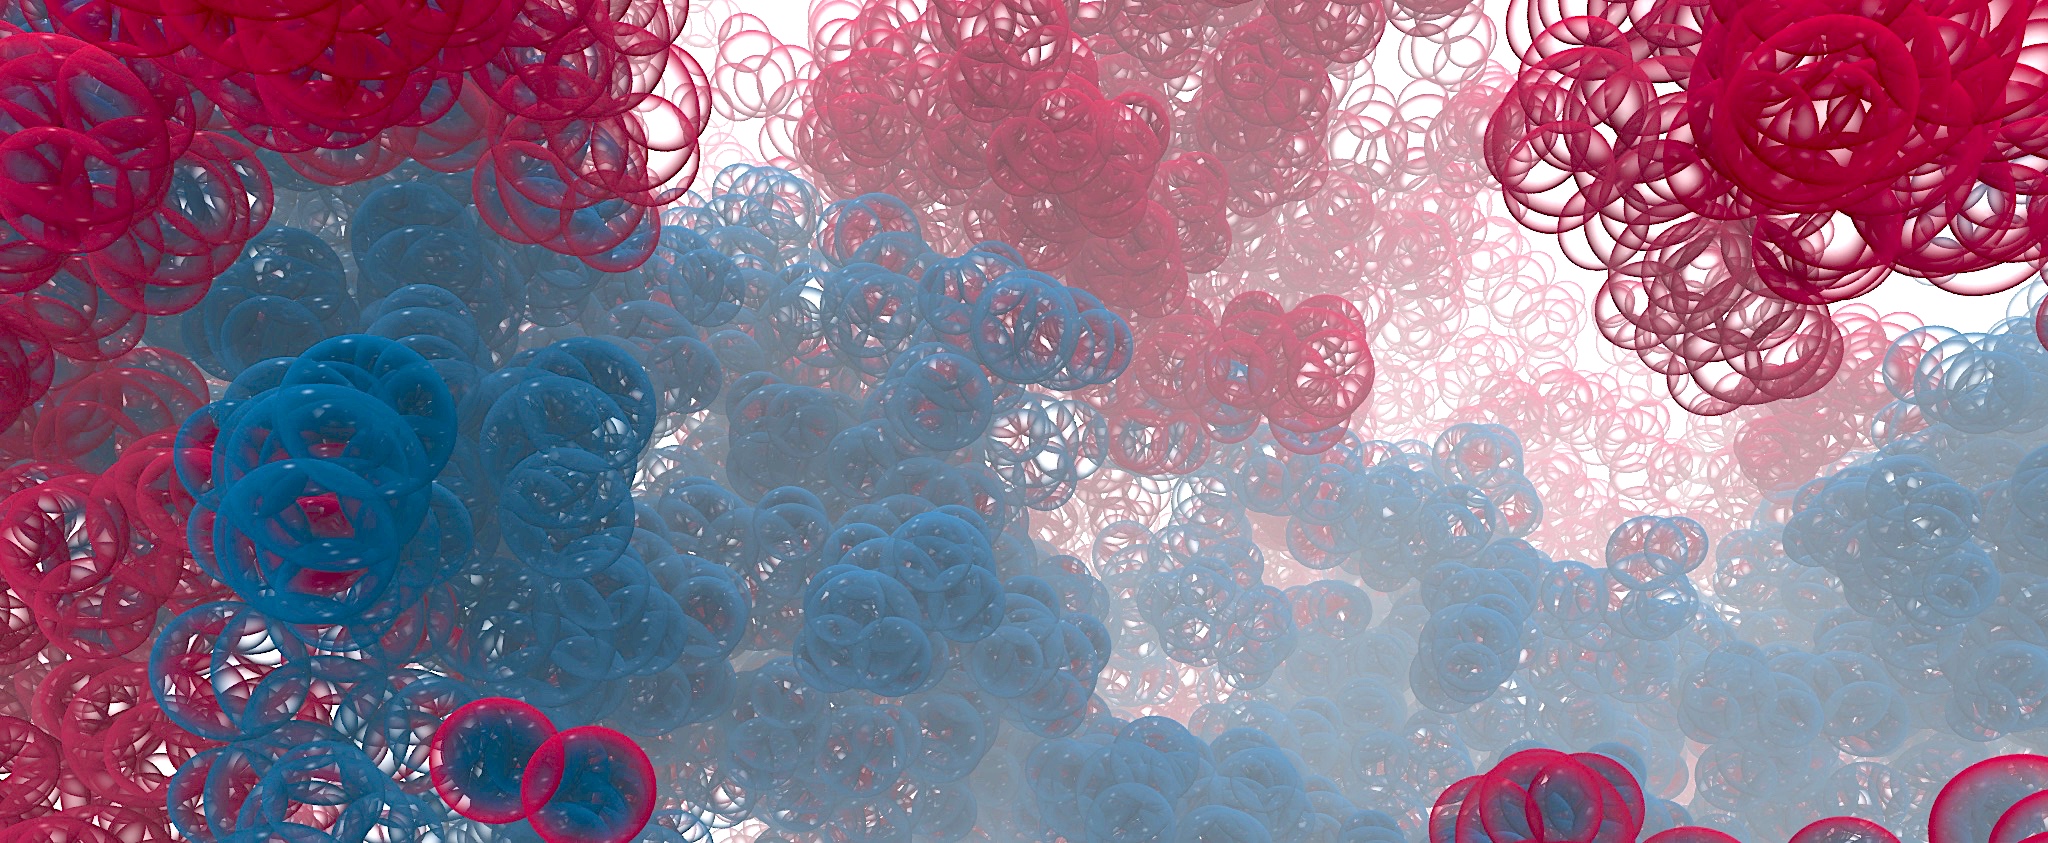 Abstract picture of molecules